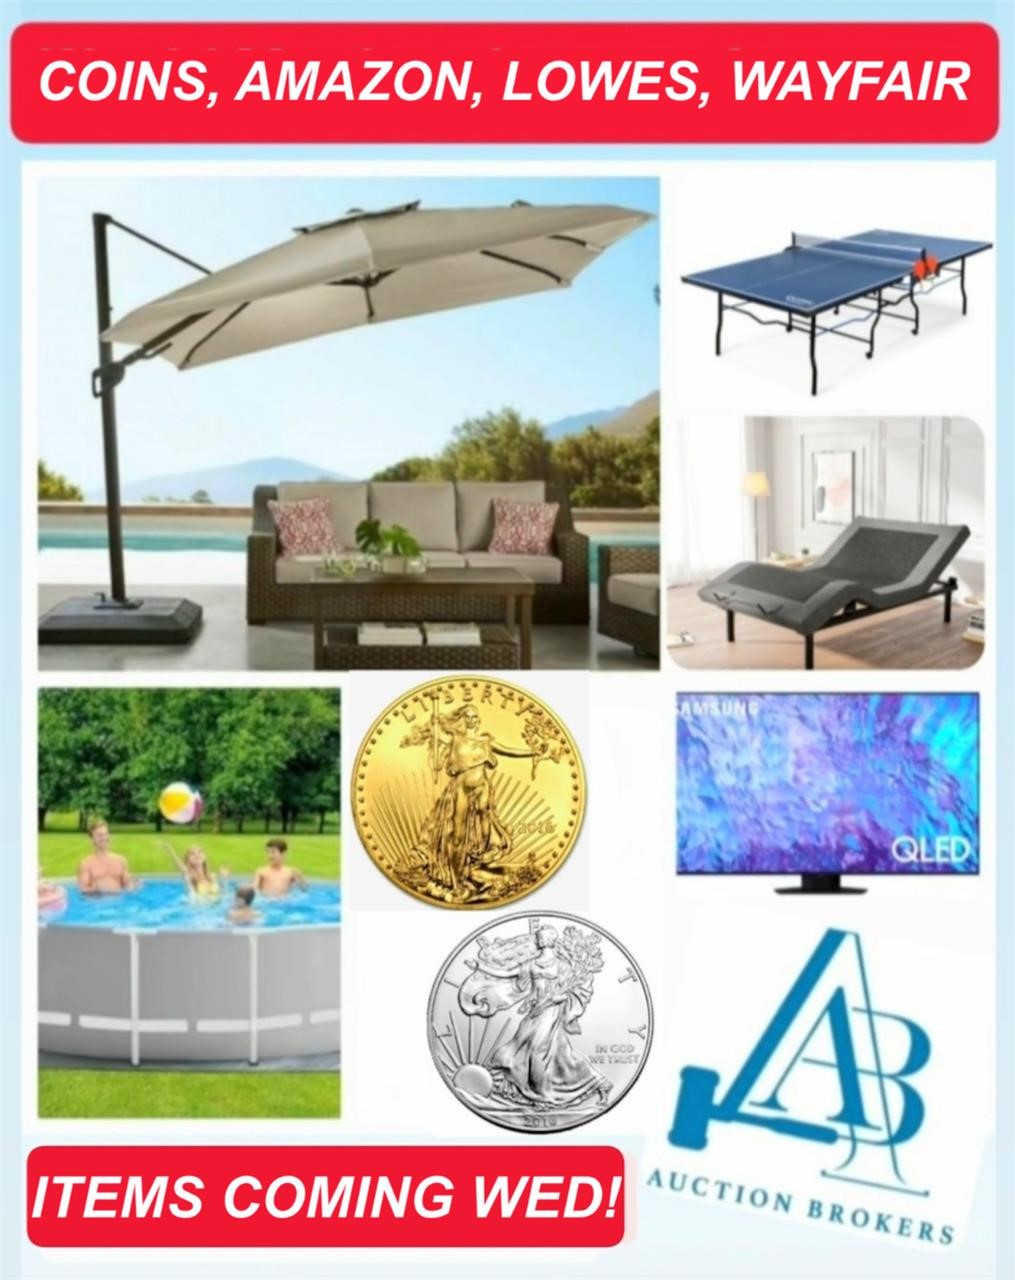 CATALOG COMING WED! Coins, Amazon, Lowes, Wayfair Overstock!